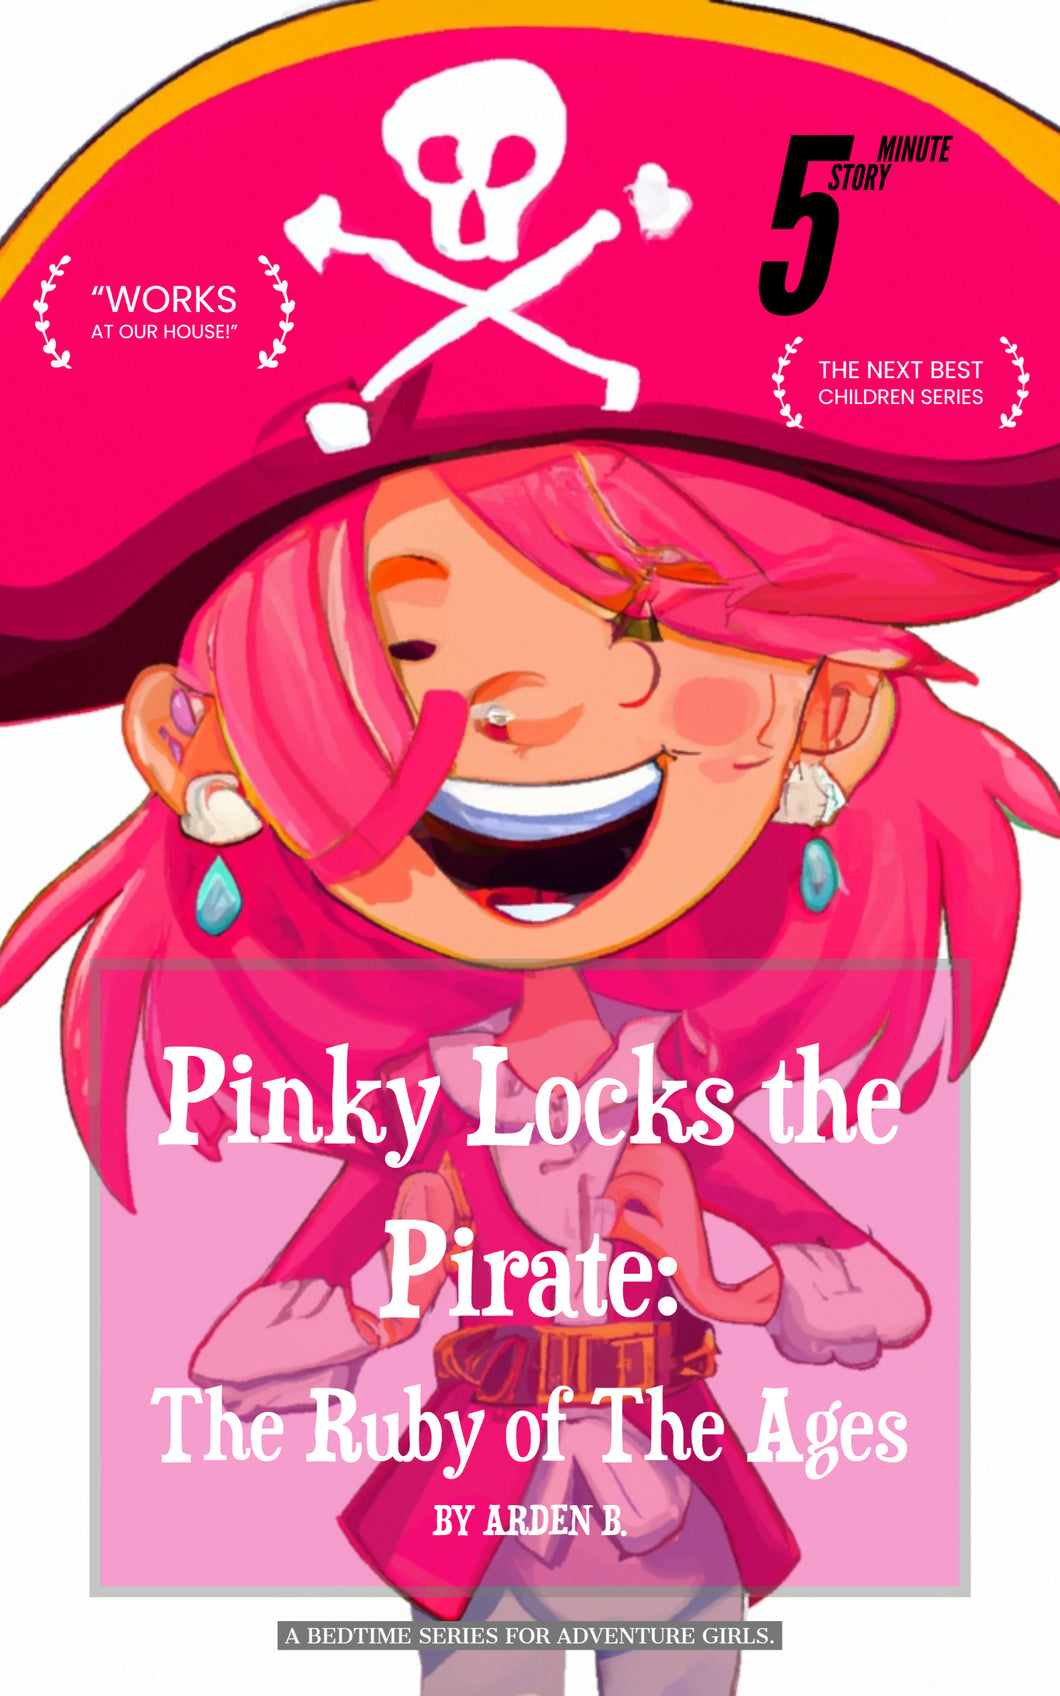 Pinky Locks the Pirate: The Ruby of the Ages